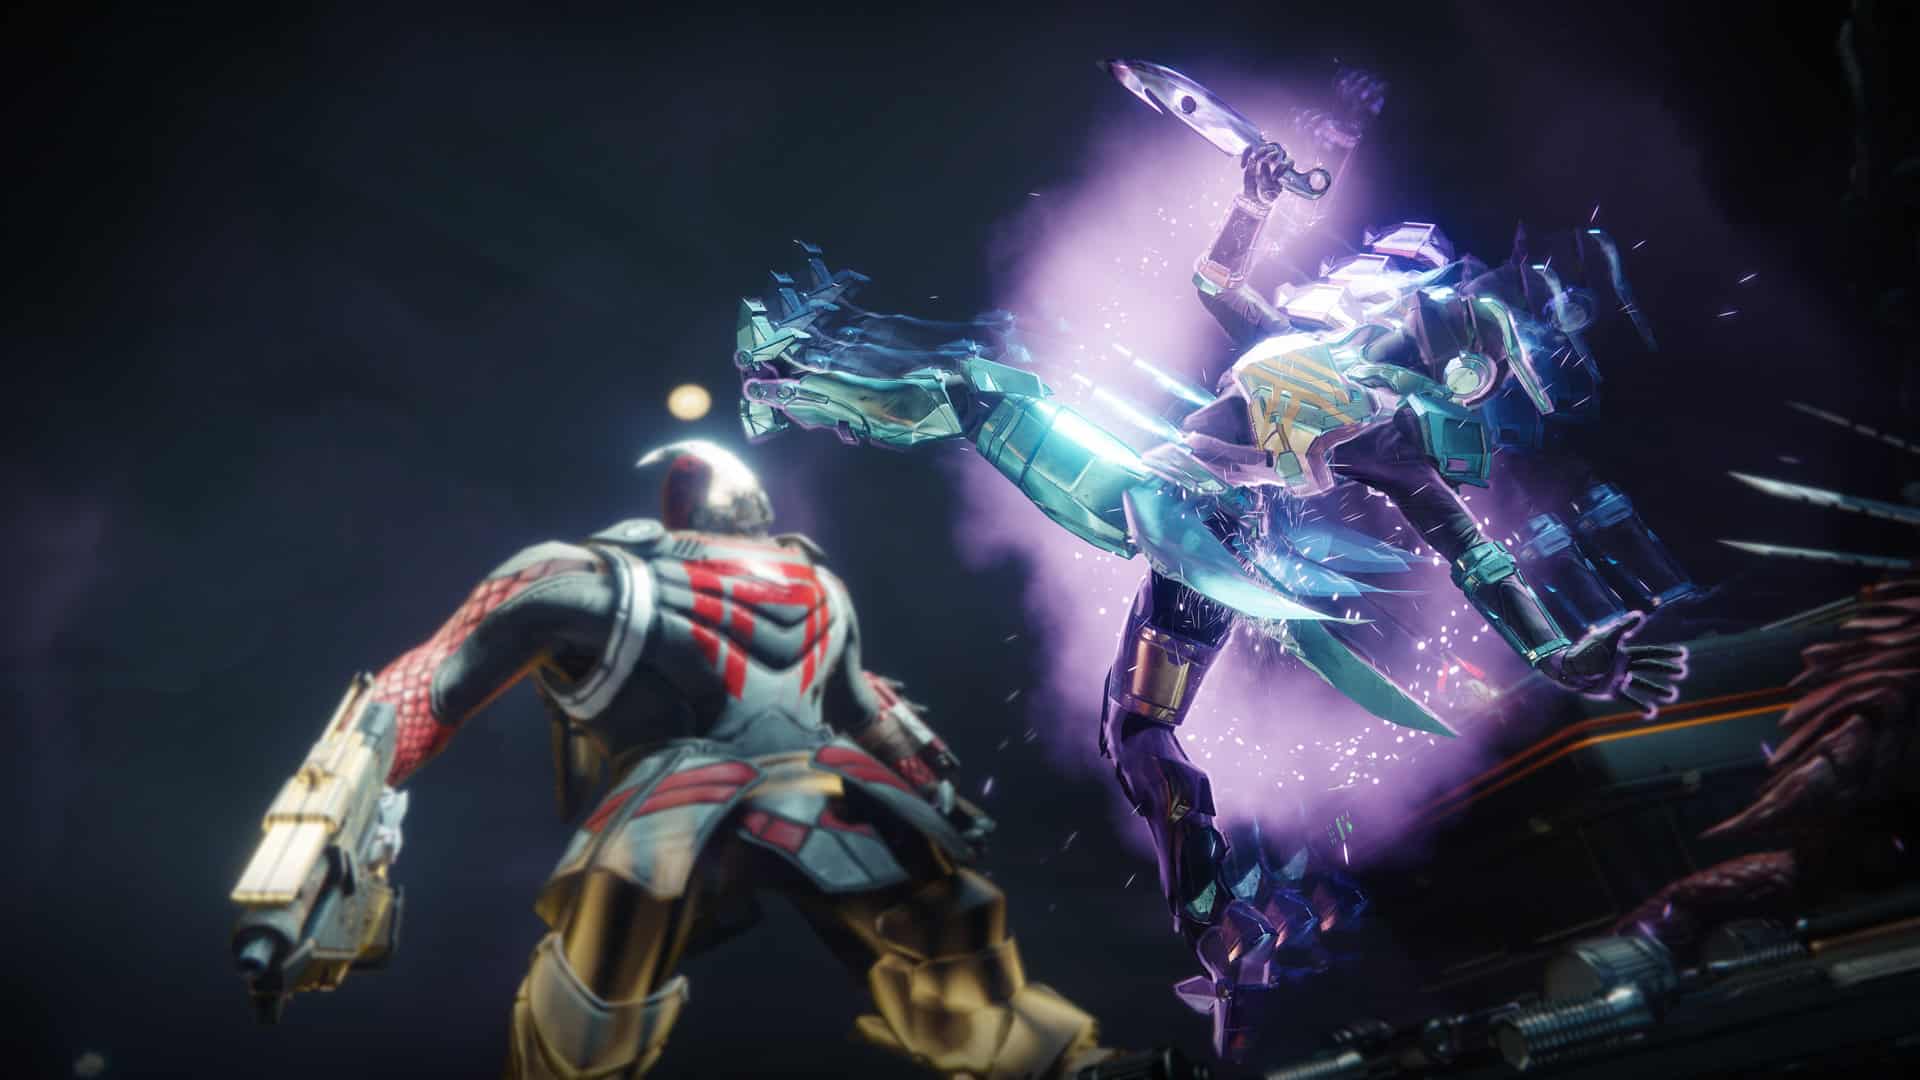 Destiny 2's The Witch Queen expansion delayed into early 2022